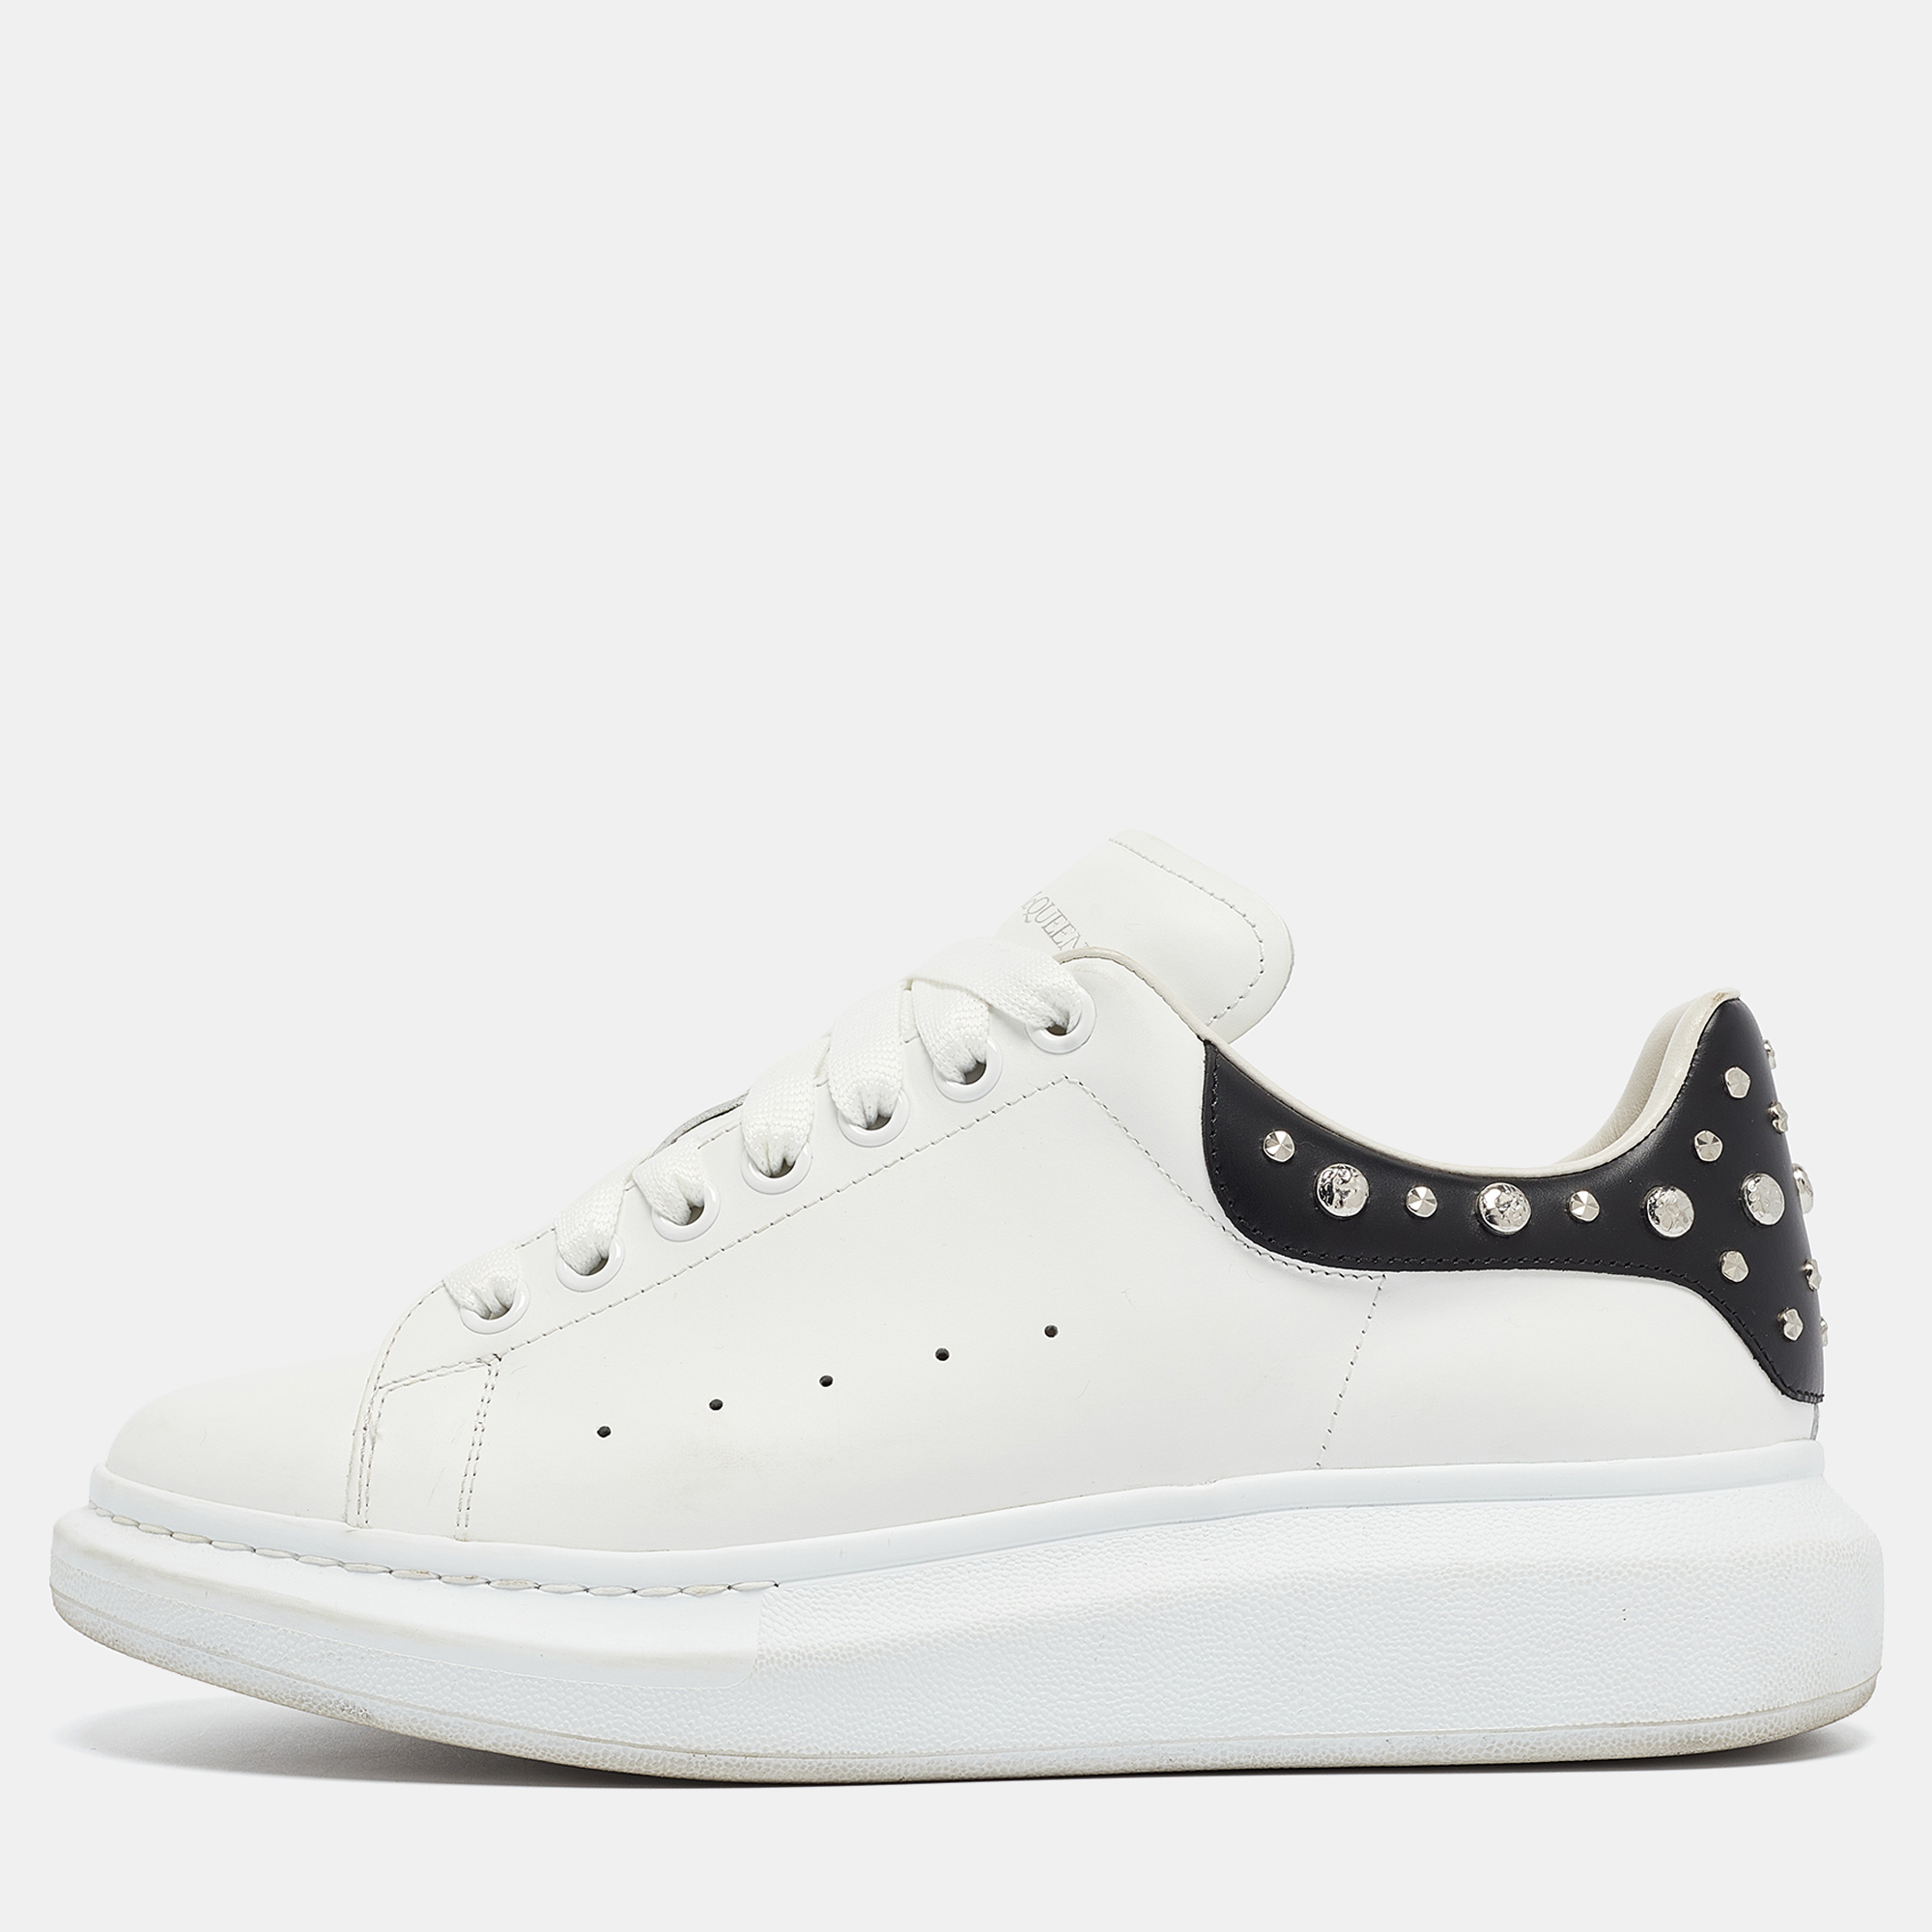 

Alexander McQueen Black/White Leather Oversized Studded Low Top Sneakers Size